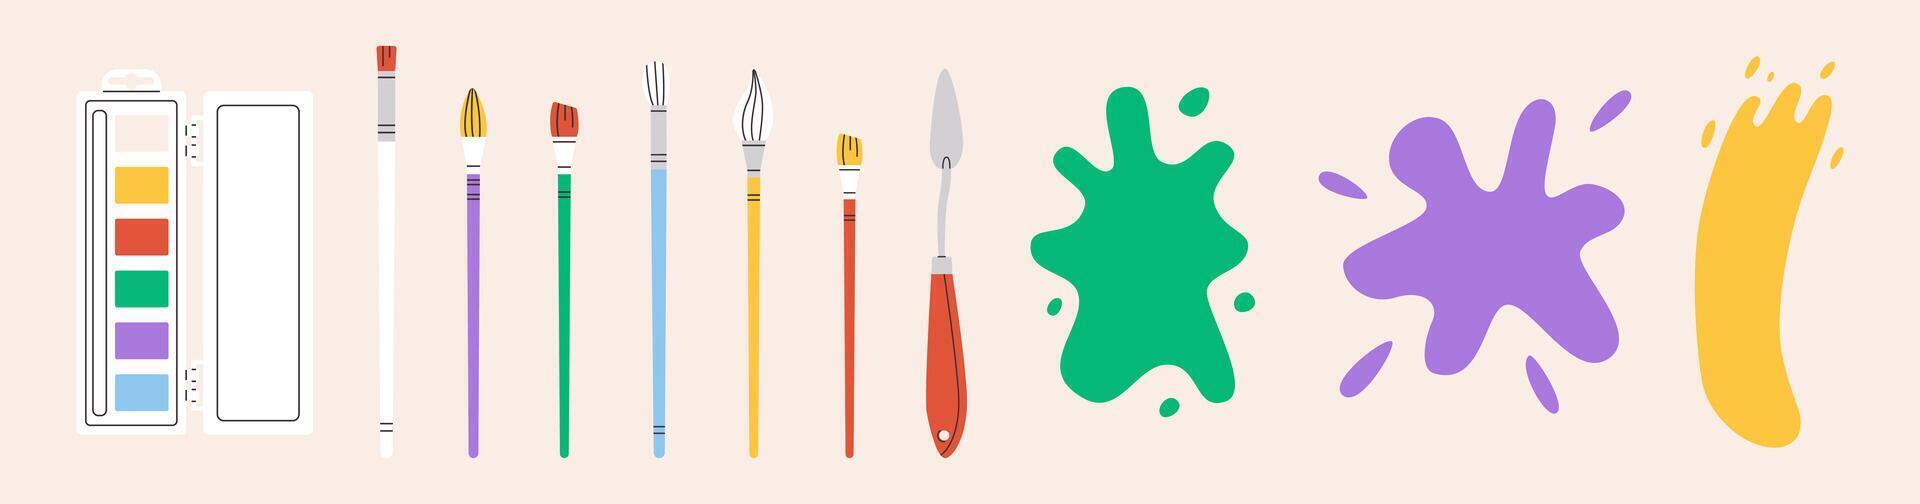 Set with painting elements. Brushes, paints and blots. Flat illustration isolated on white. Hand drawn style. vector